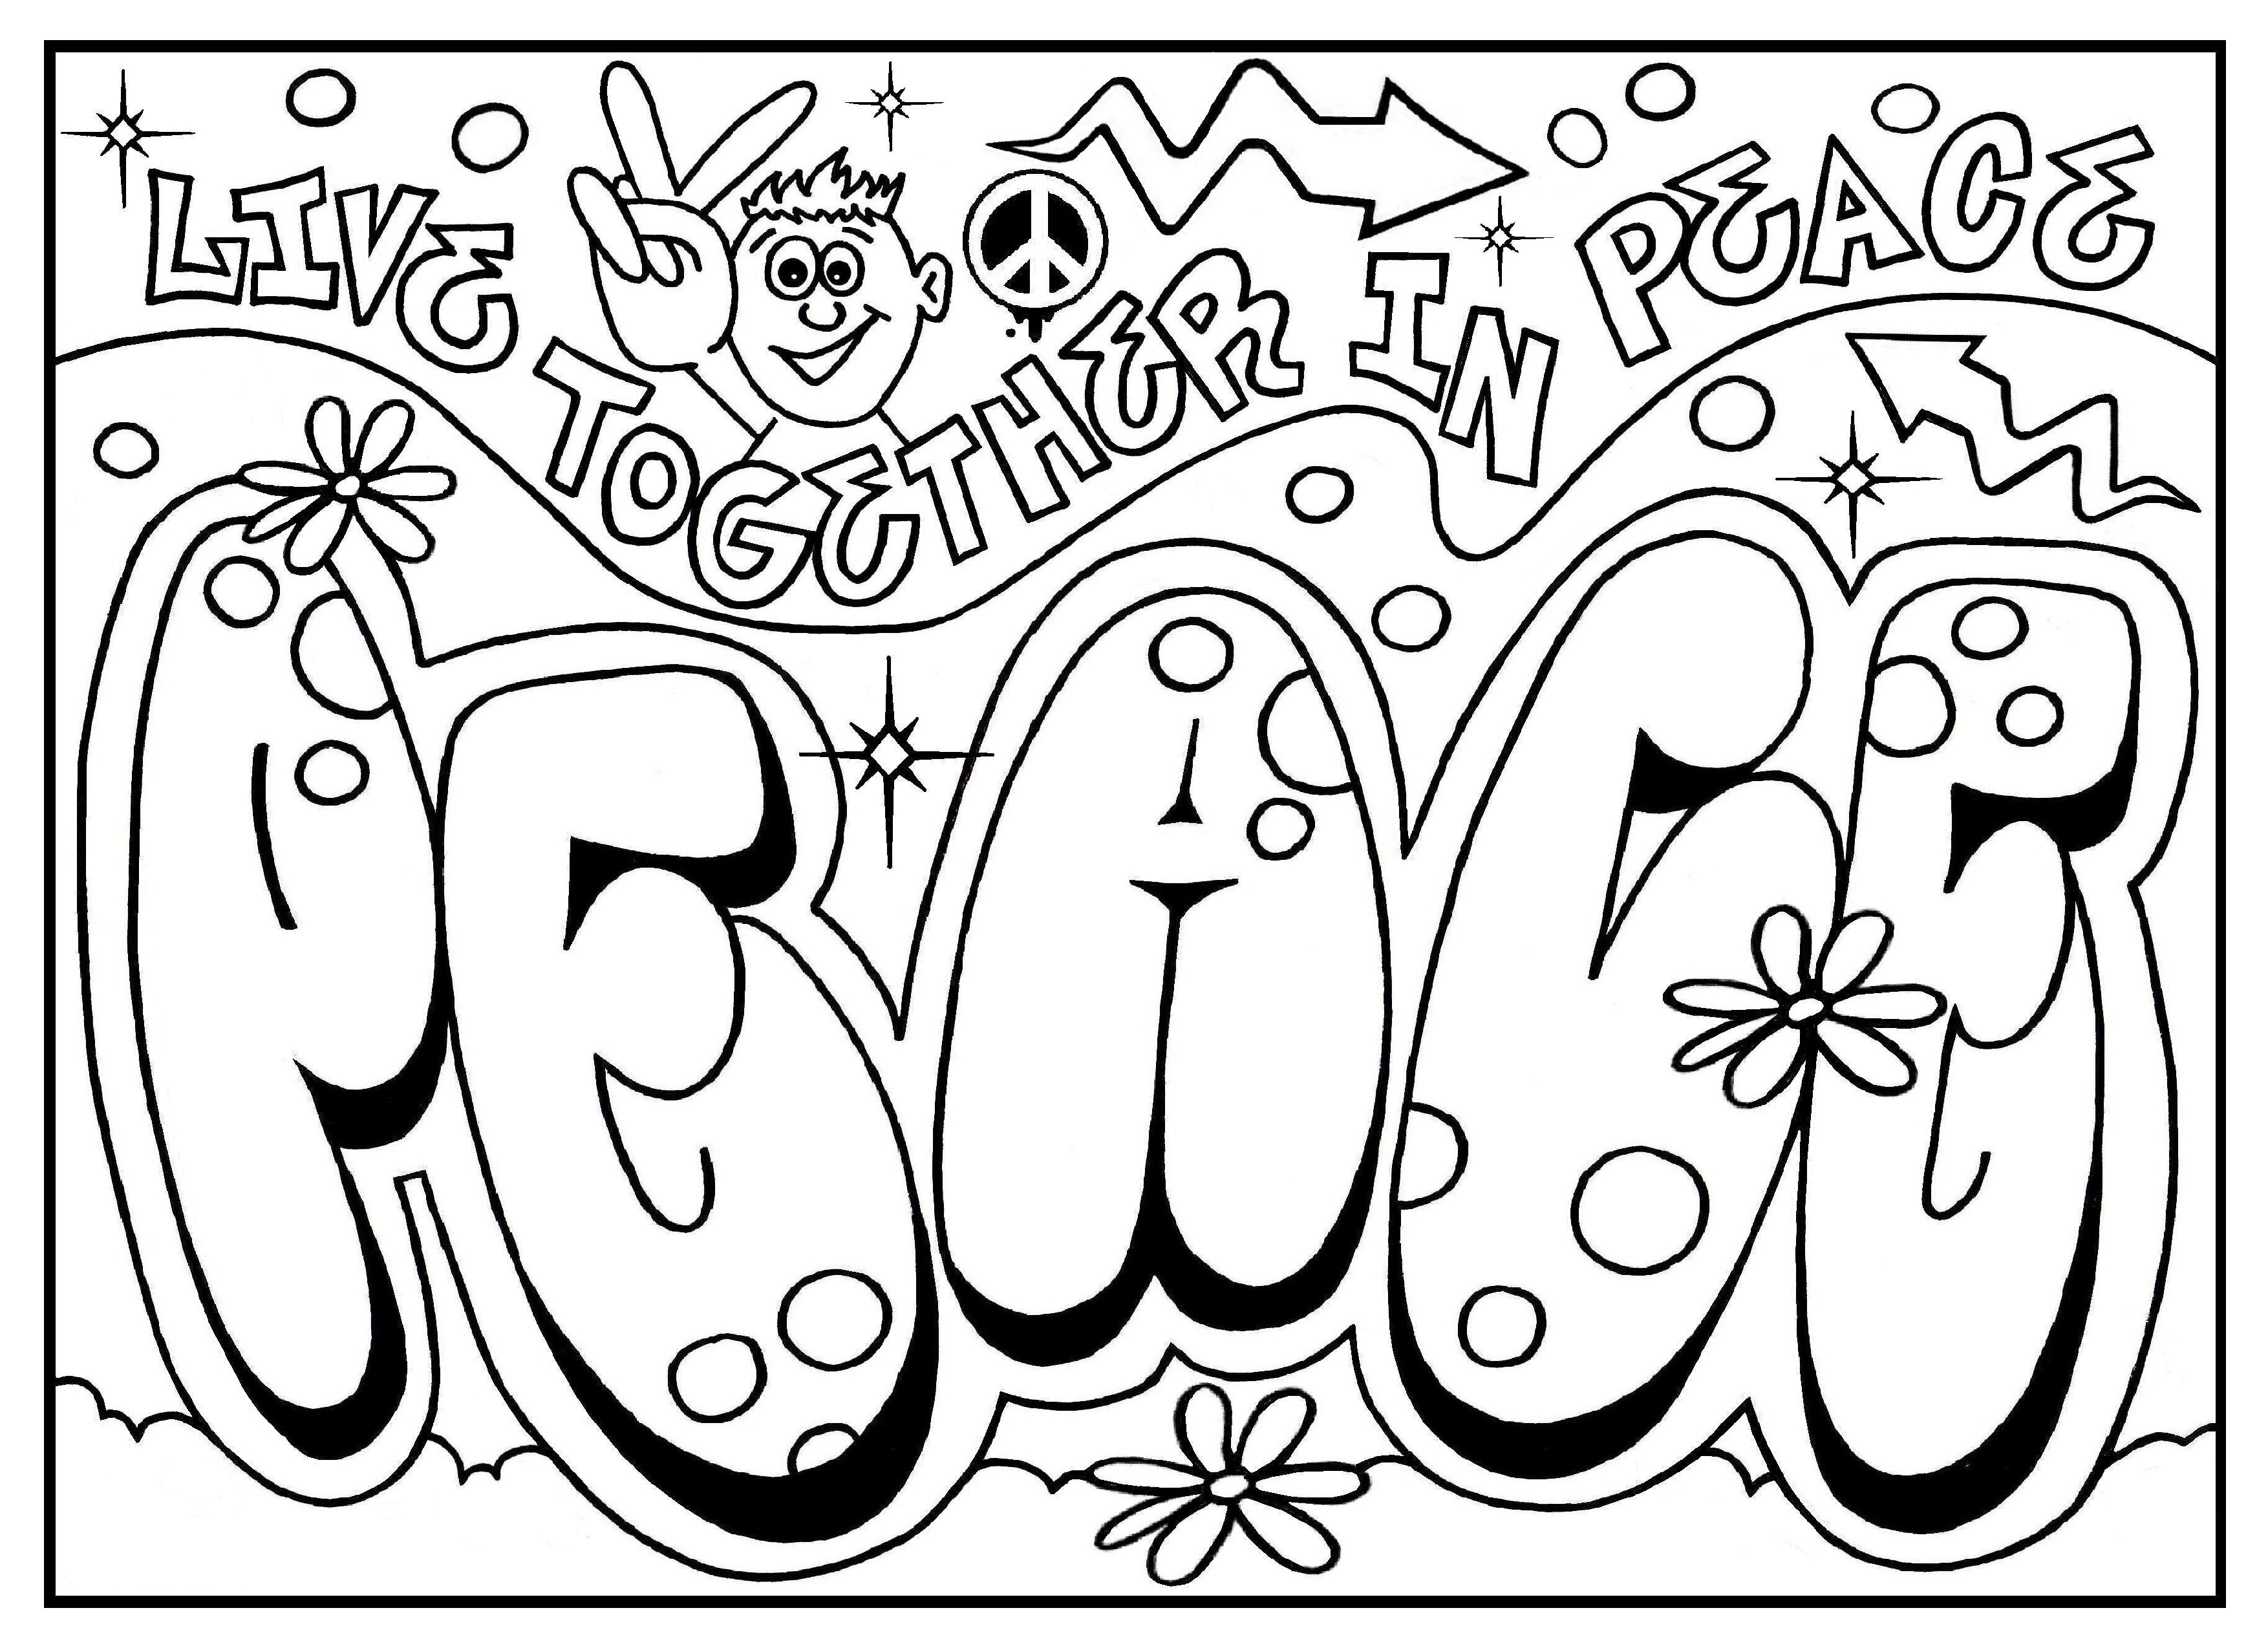 Download Graffiti Coloring Pages for Teens and Adults - Best Coloring Pages For Kids